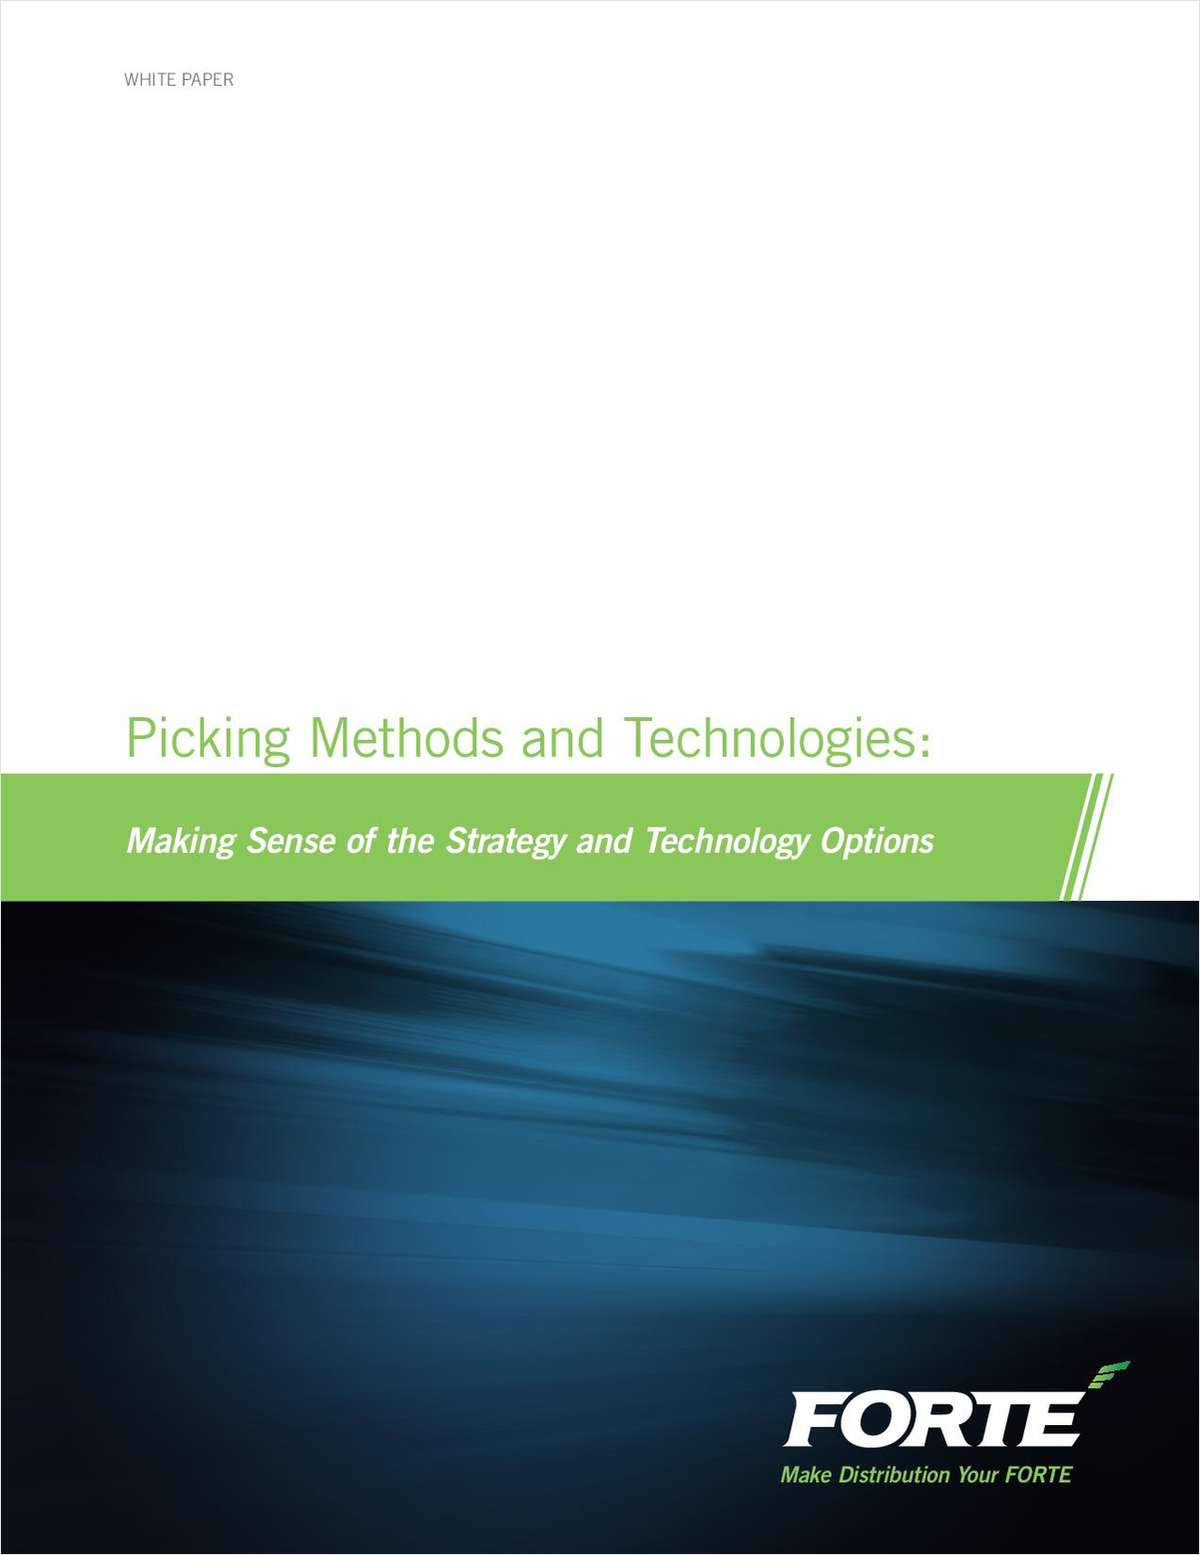 Picking Methods and Technologies: Making Sense of the Strategy and Technology Options